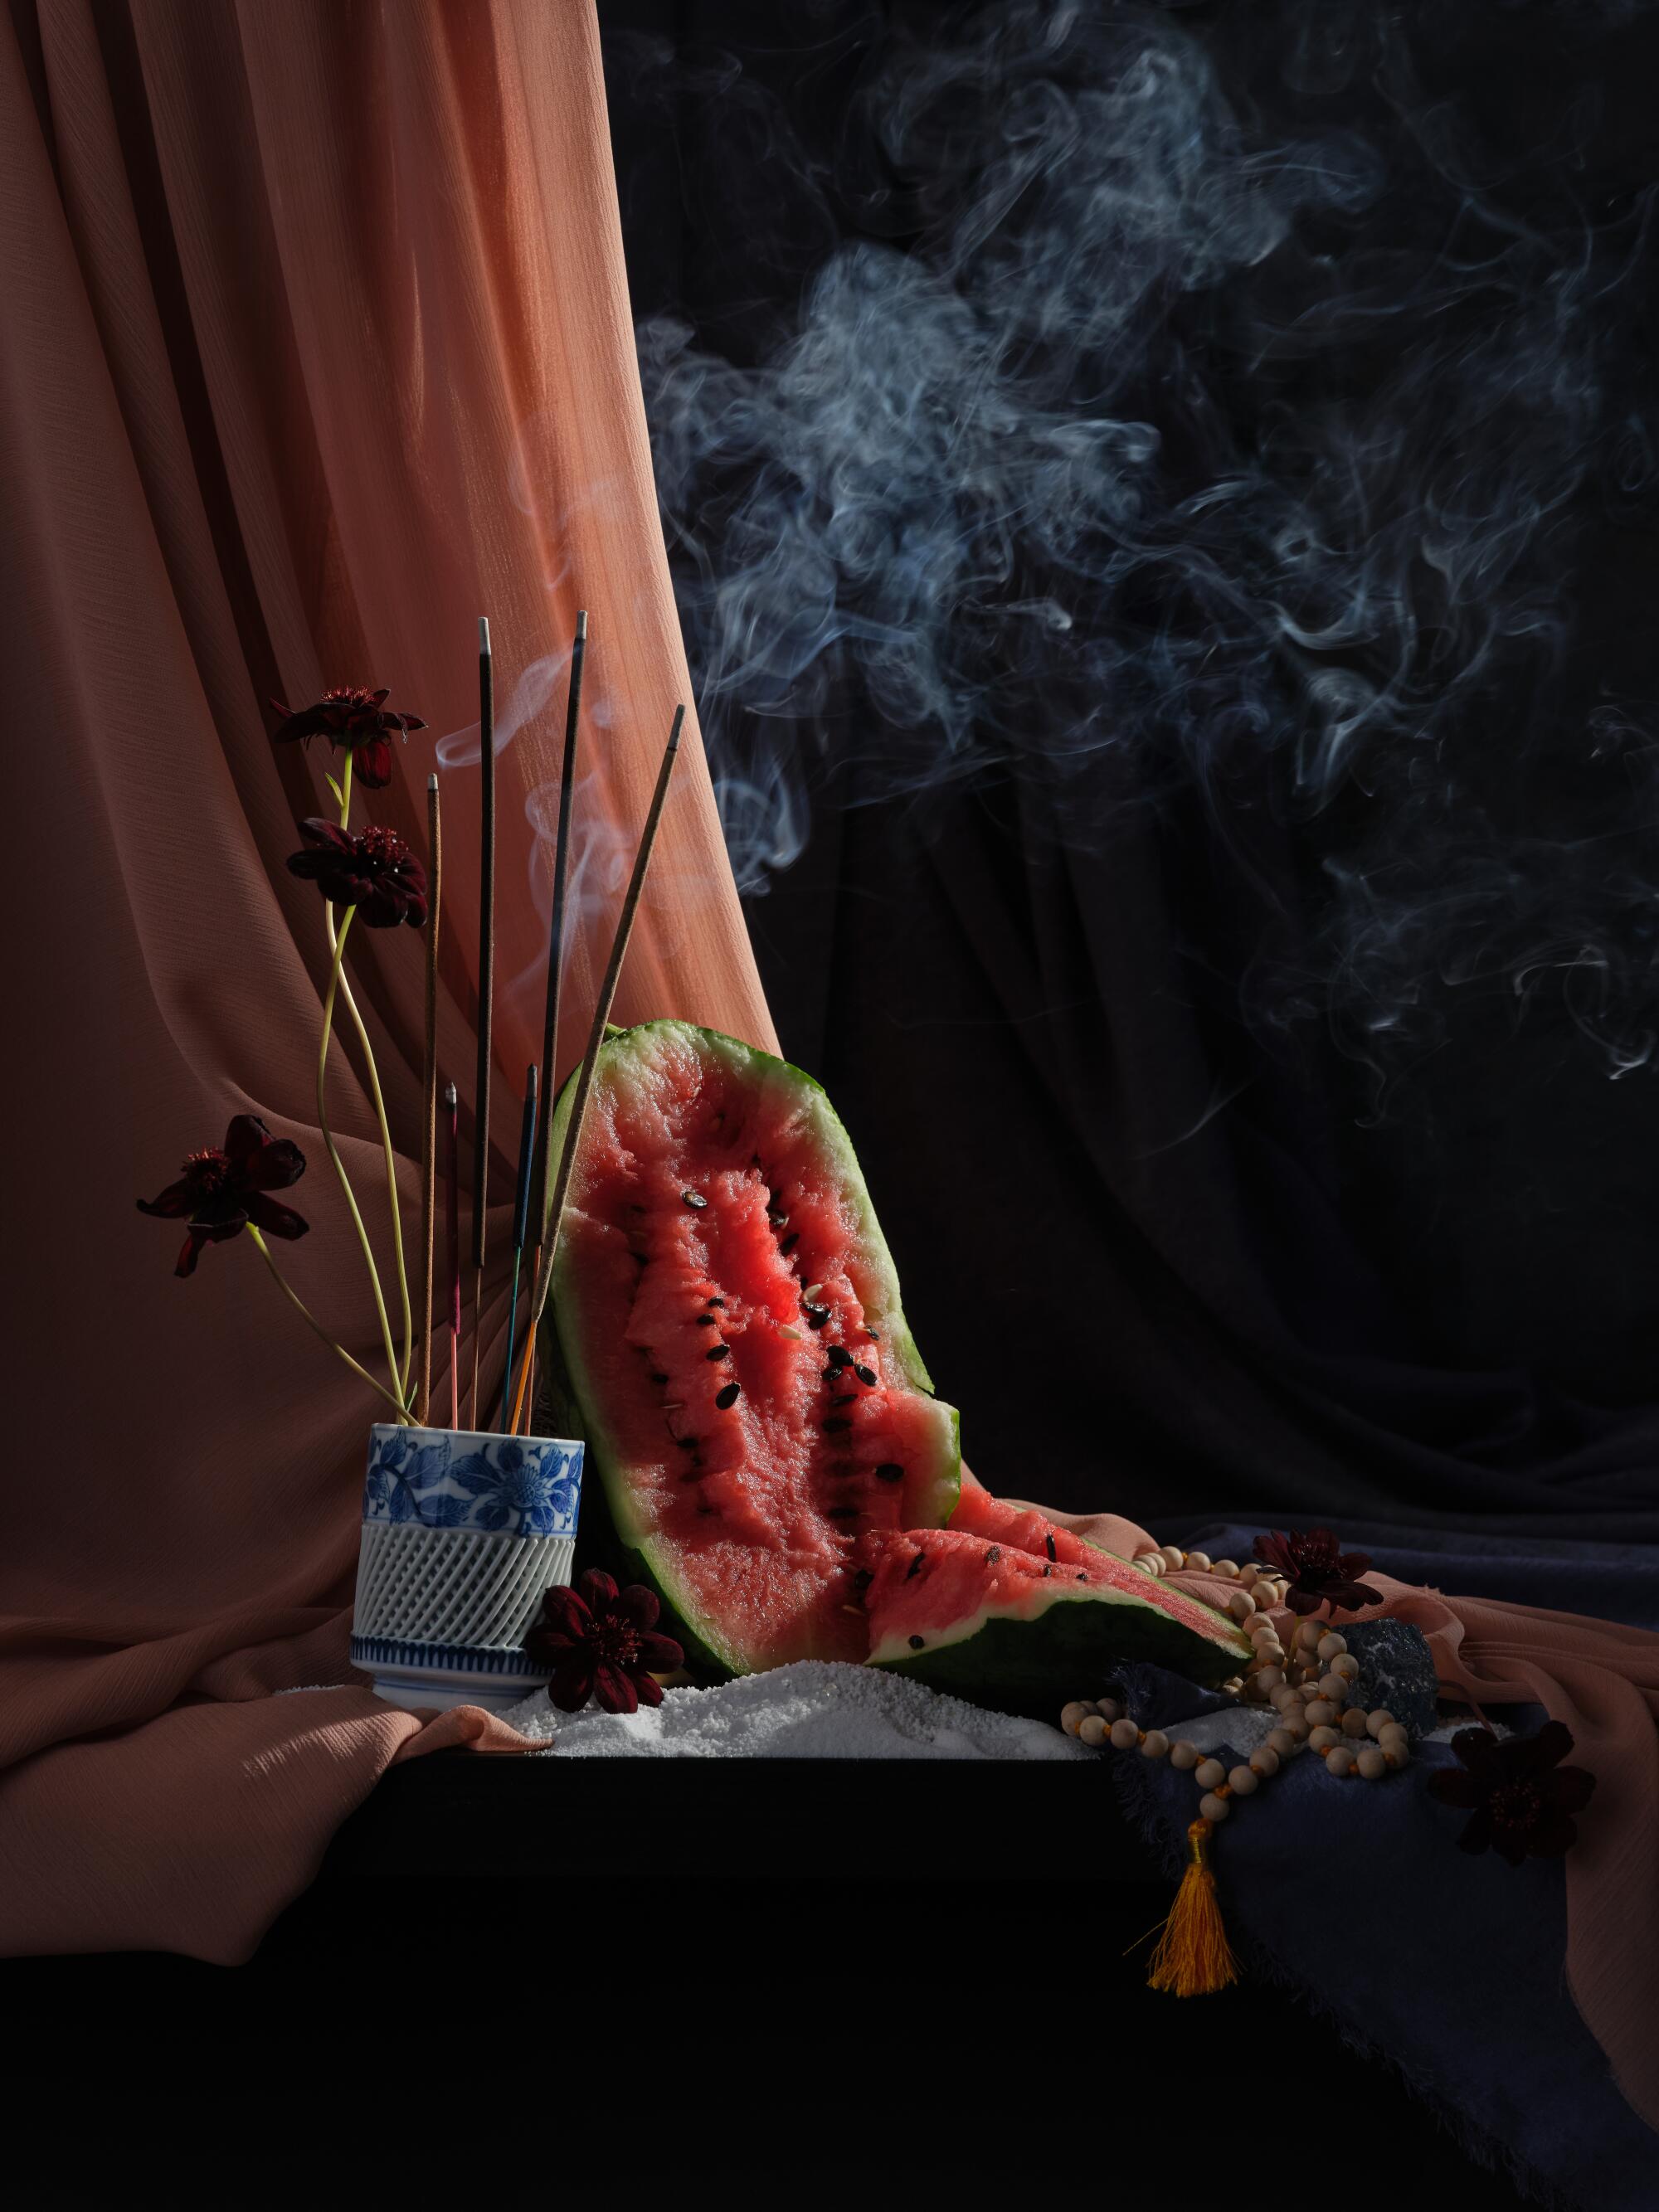 a ceramic jar filled with incense sticks and tall flowers next to an open watermelon leaning against a coral curtain